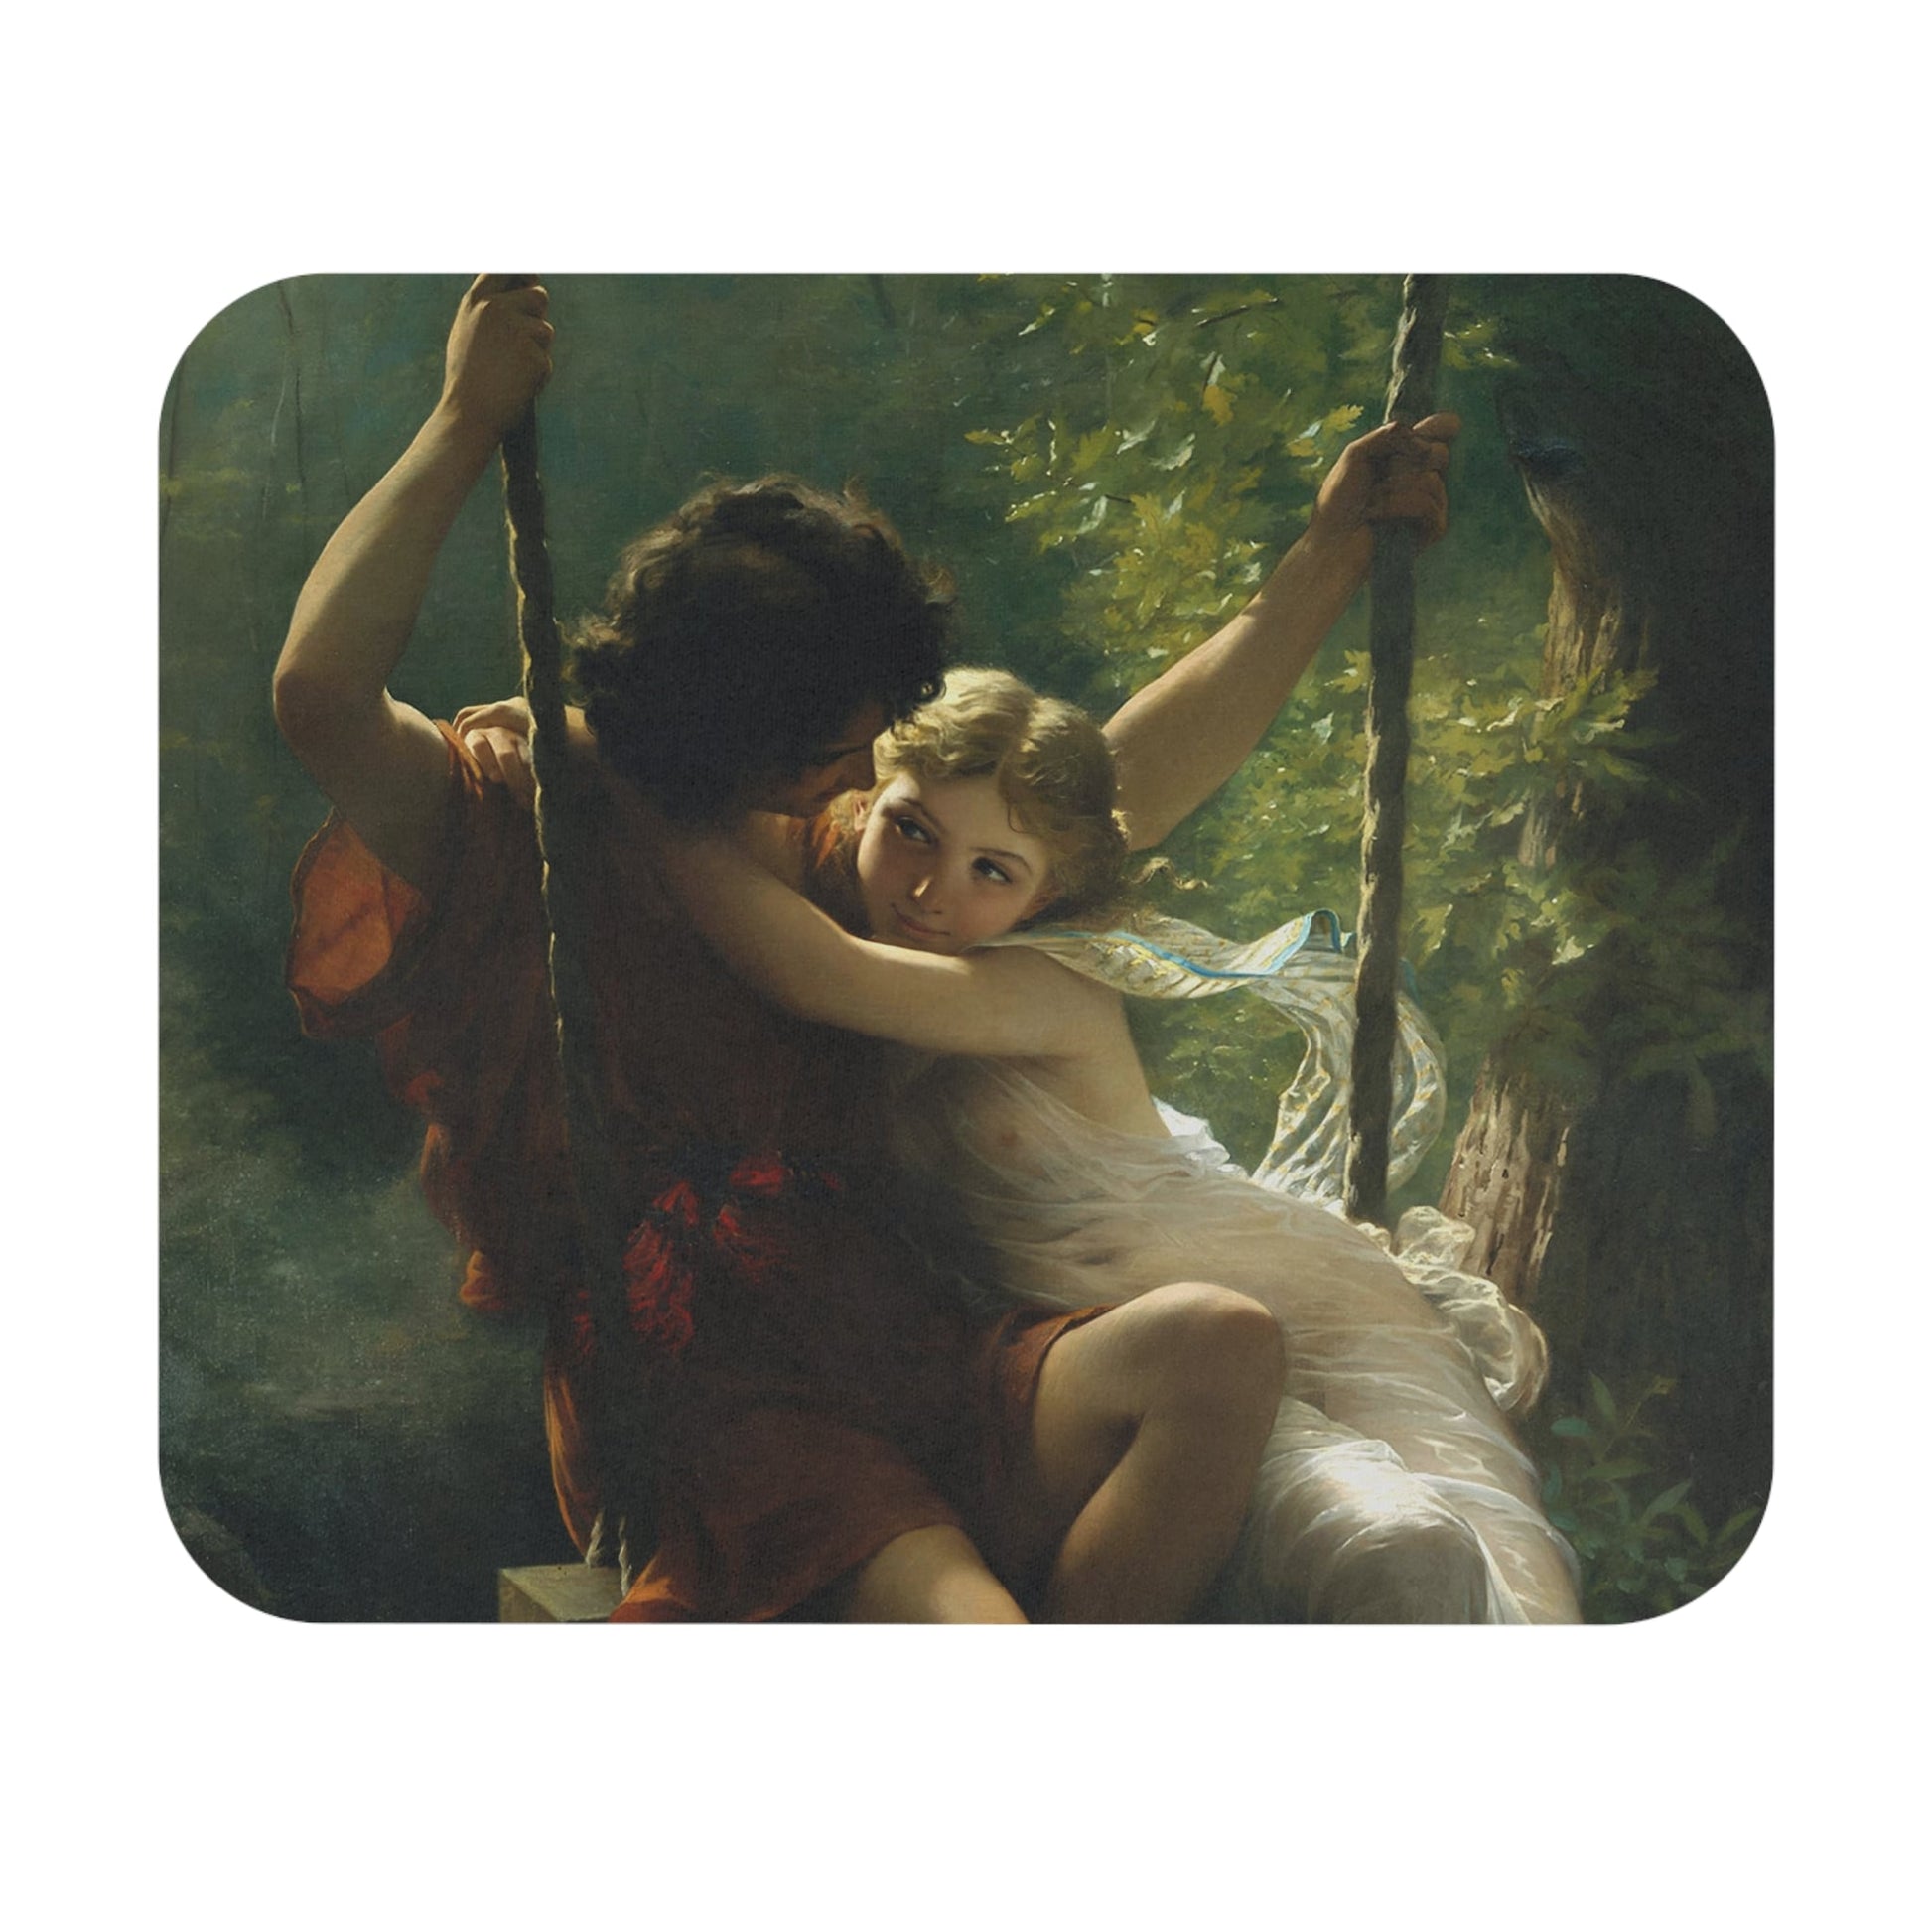 Lovers on a Swing Mouse Pad with Victorian period art, desk and office decor featuring romantic swing scenes.